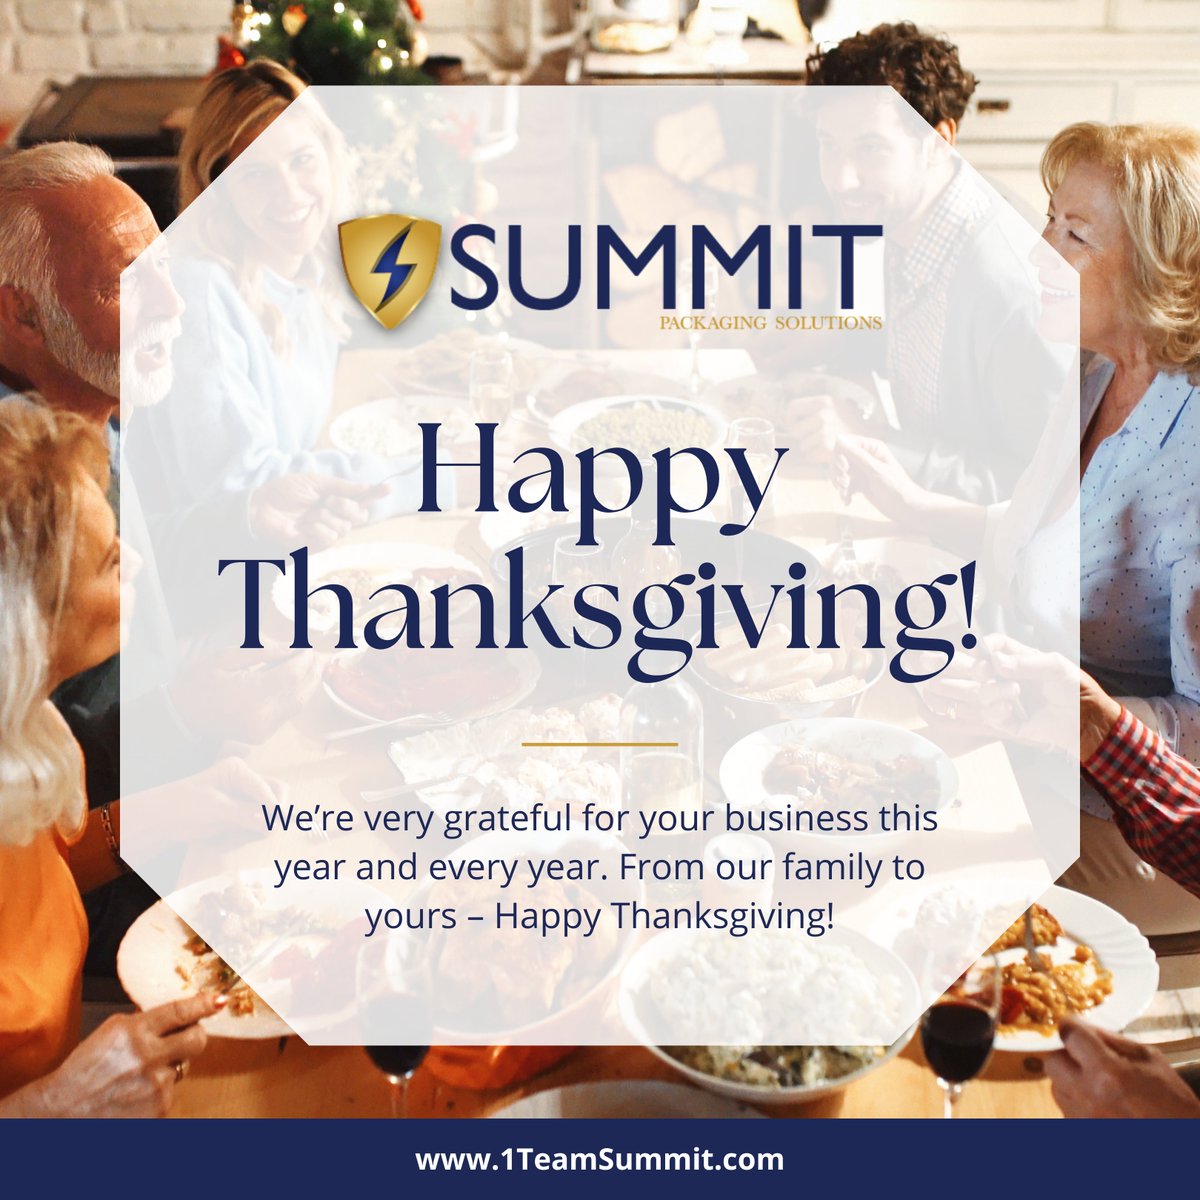 Happy Thanksgiving from Summit Packaging Solutions!